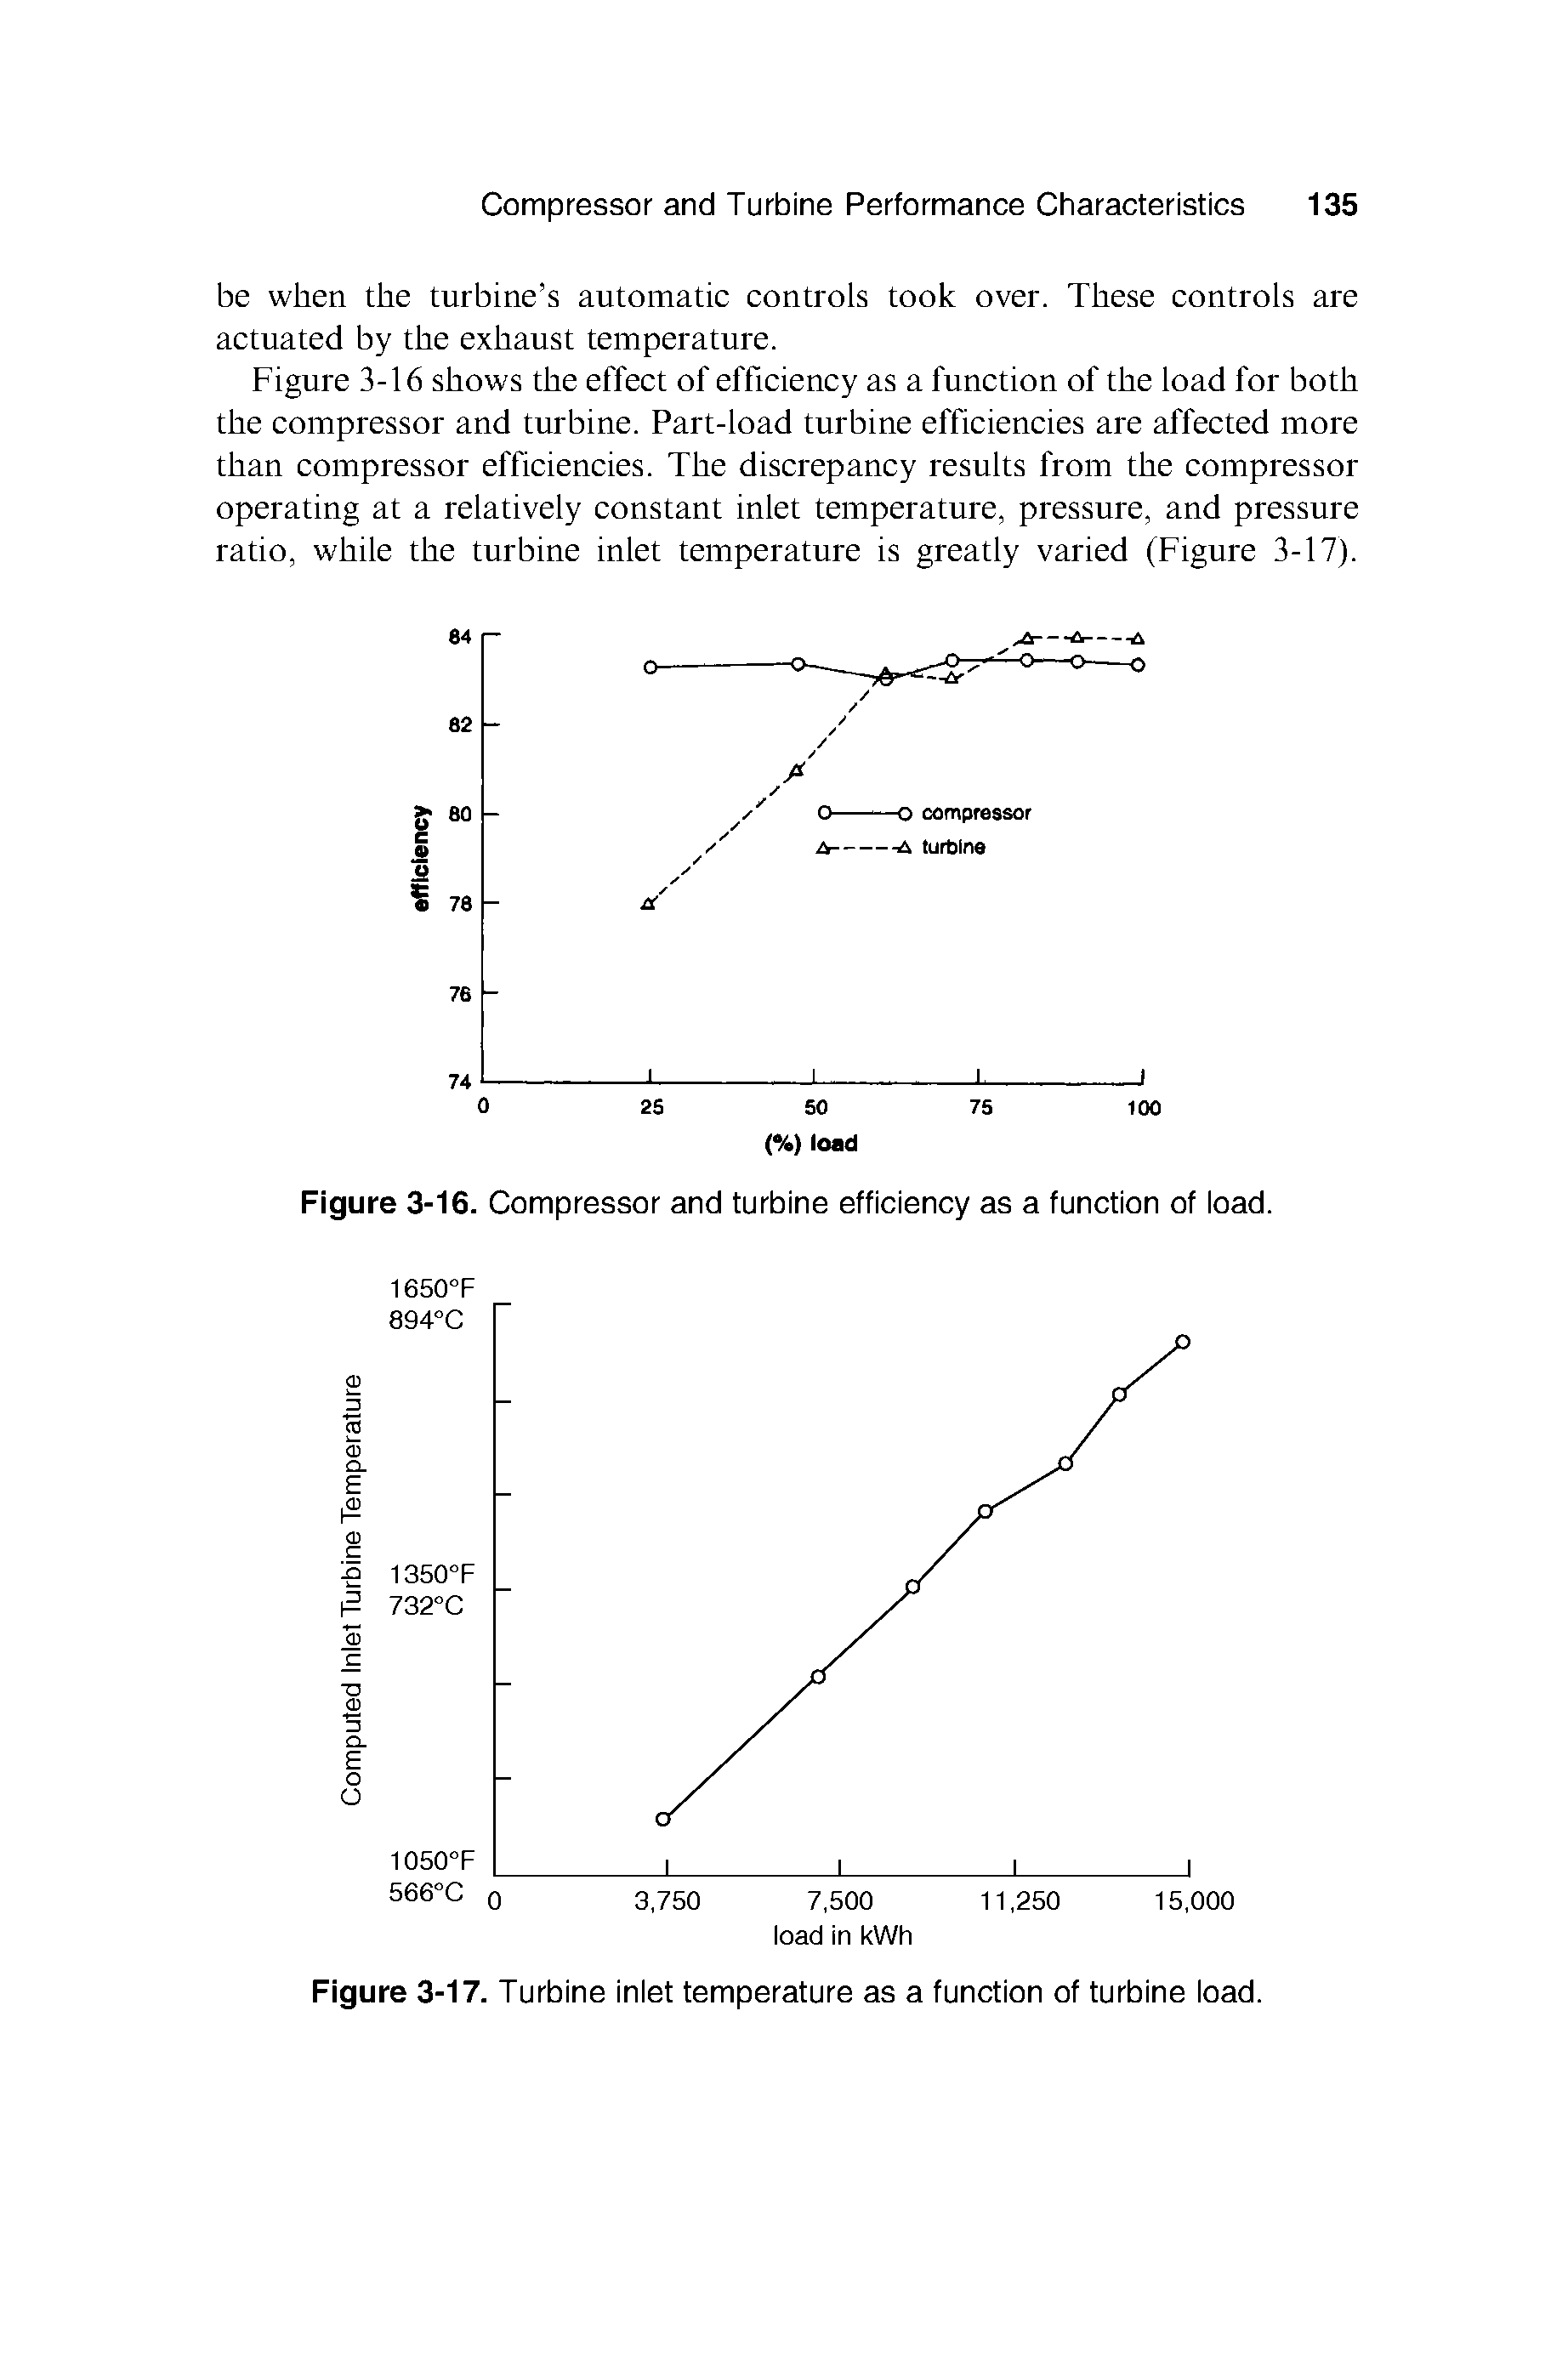 Figure 3-16. Compressor and turbine efficiency as a function of ioad.